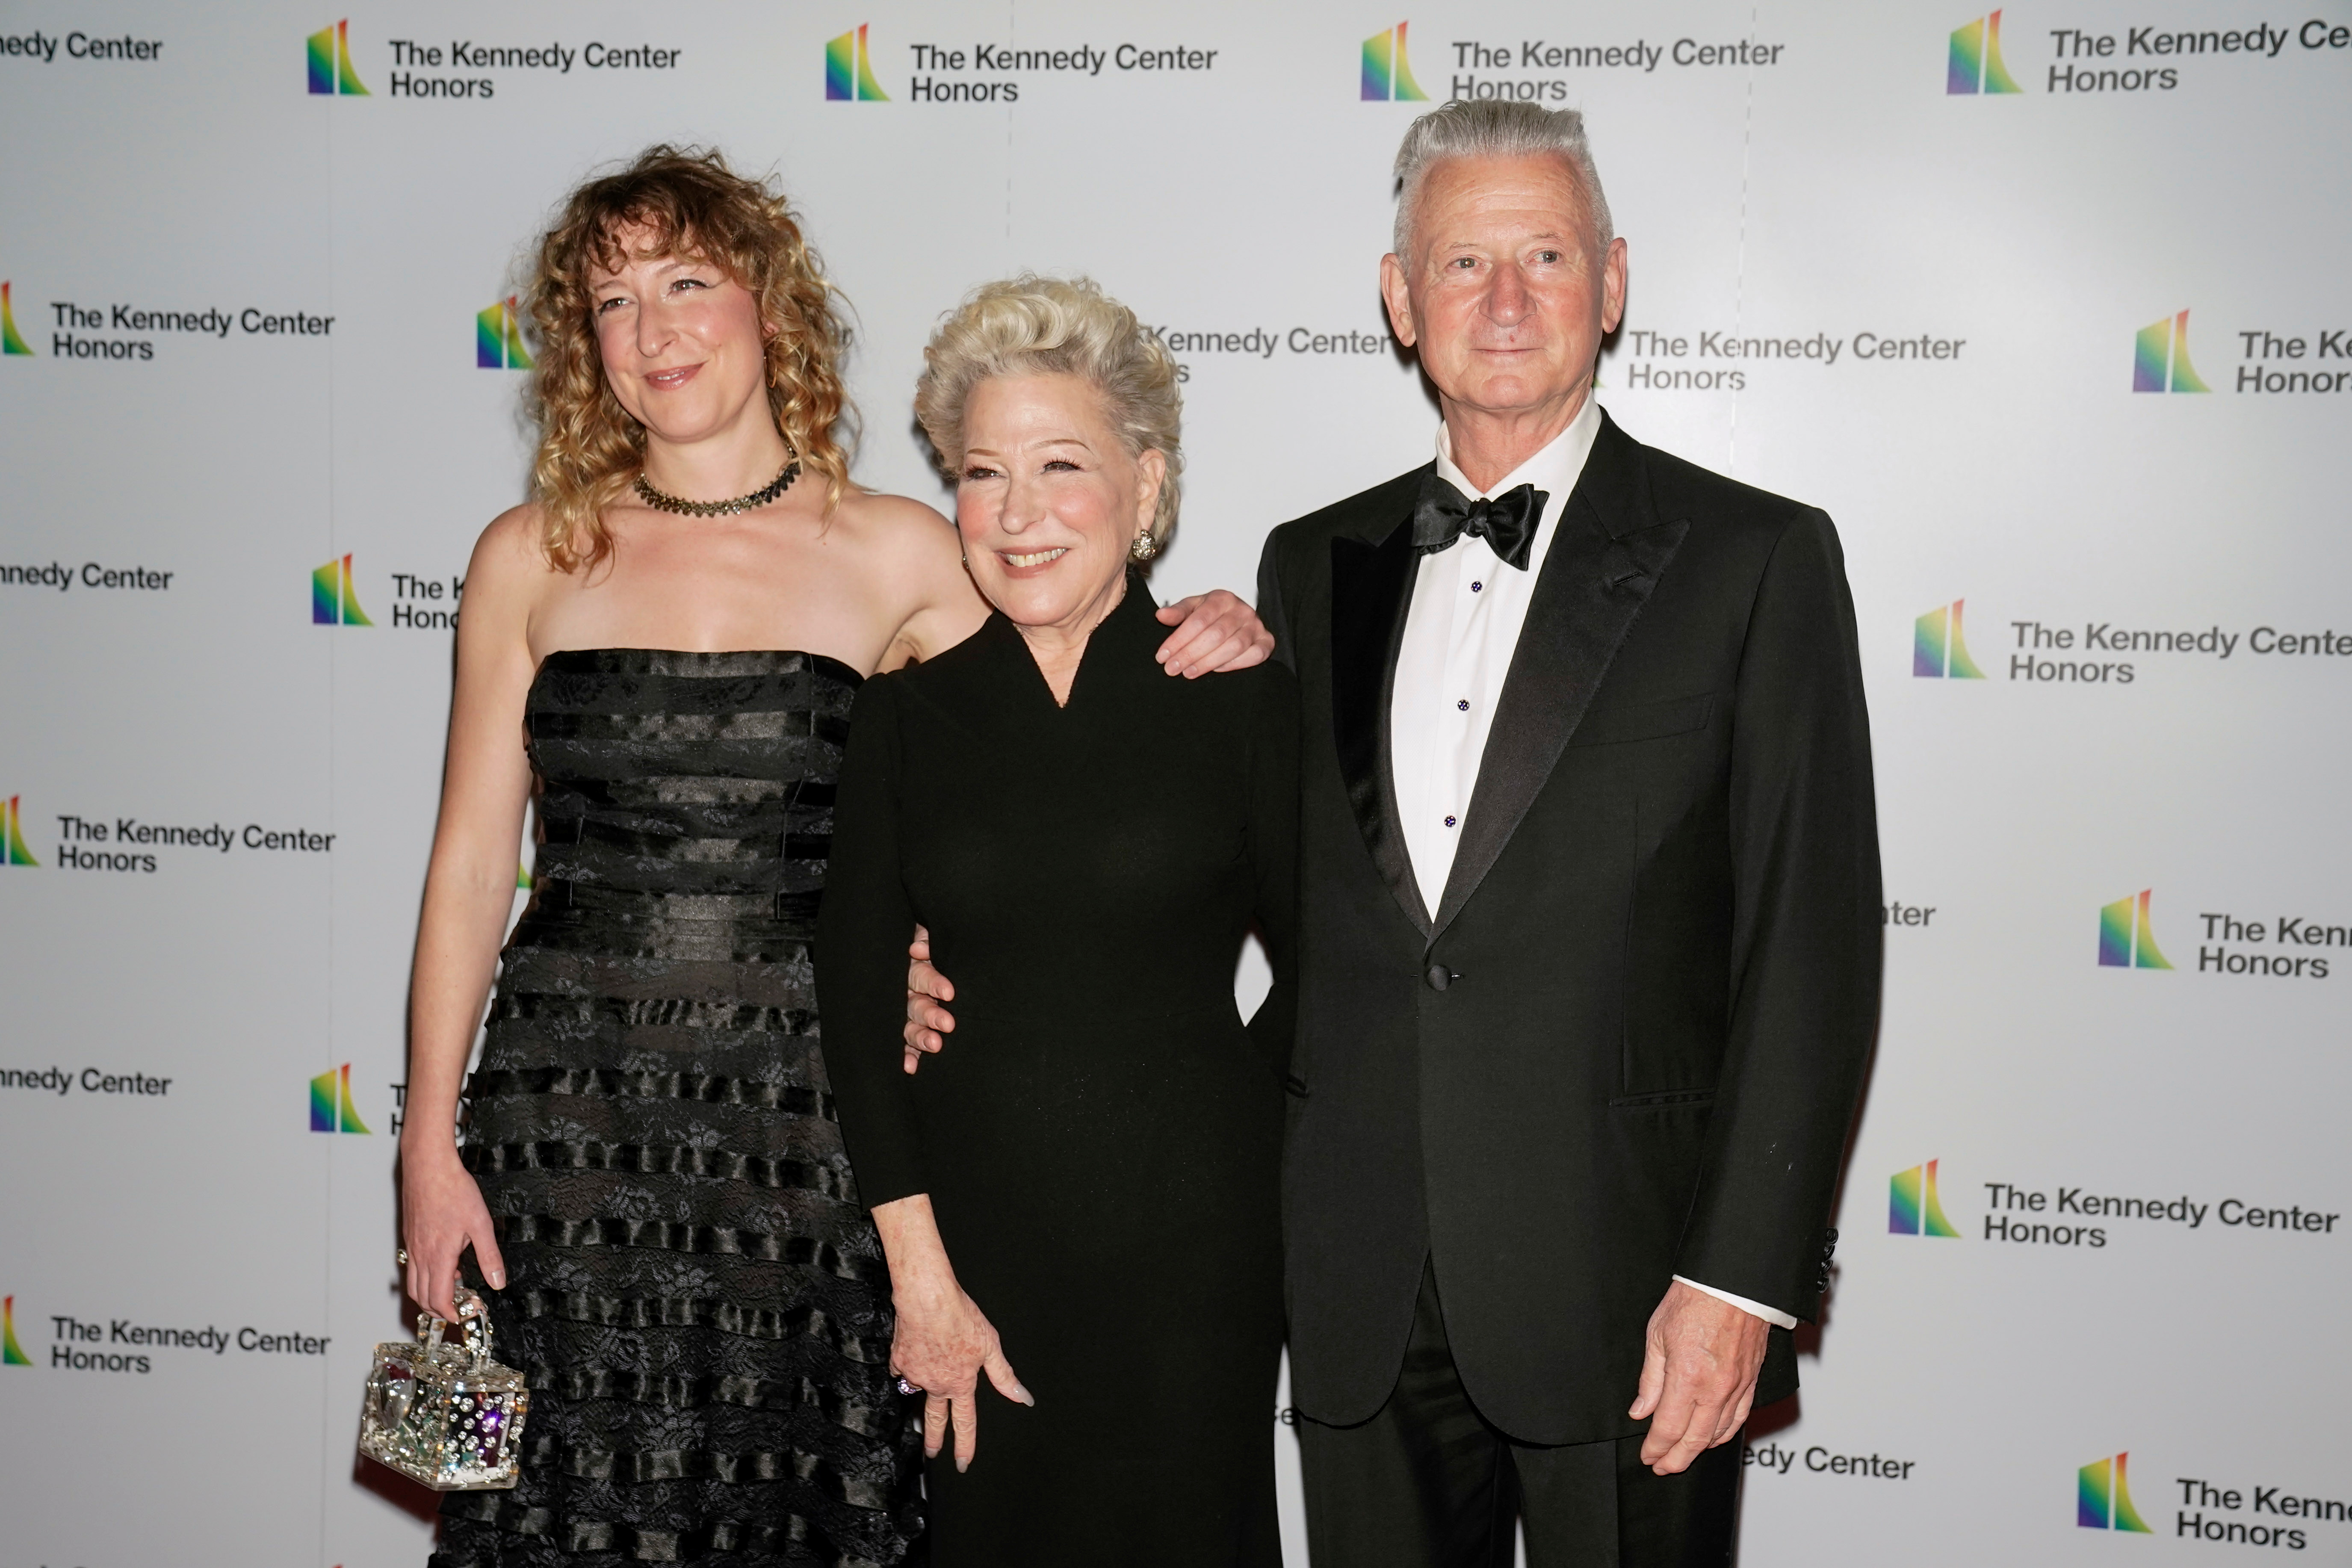 Kennedy Center Honoree, actress and singer-songwriter Bette Midler, daughter Sofie Haselberg and Martin von Haselberg pose on the red carpet as they attend The 44th Annual Kennedy Center Honors medallion ceremony at the Library of Congress in Washington, U.S., December 4, 2021. REUTERS/Ken Cedeno